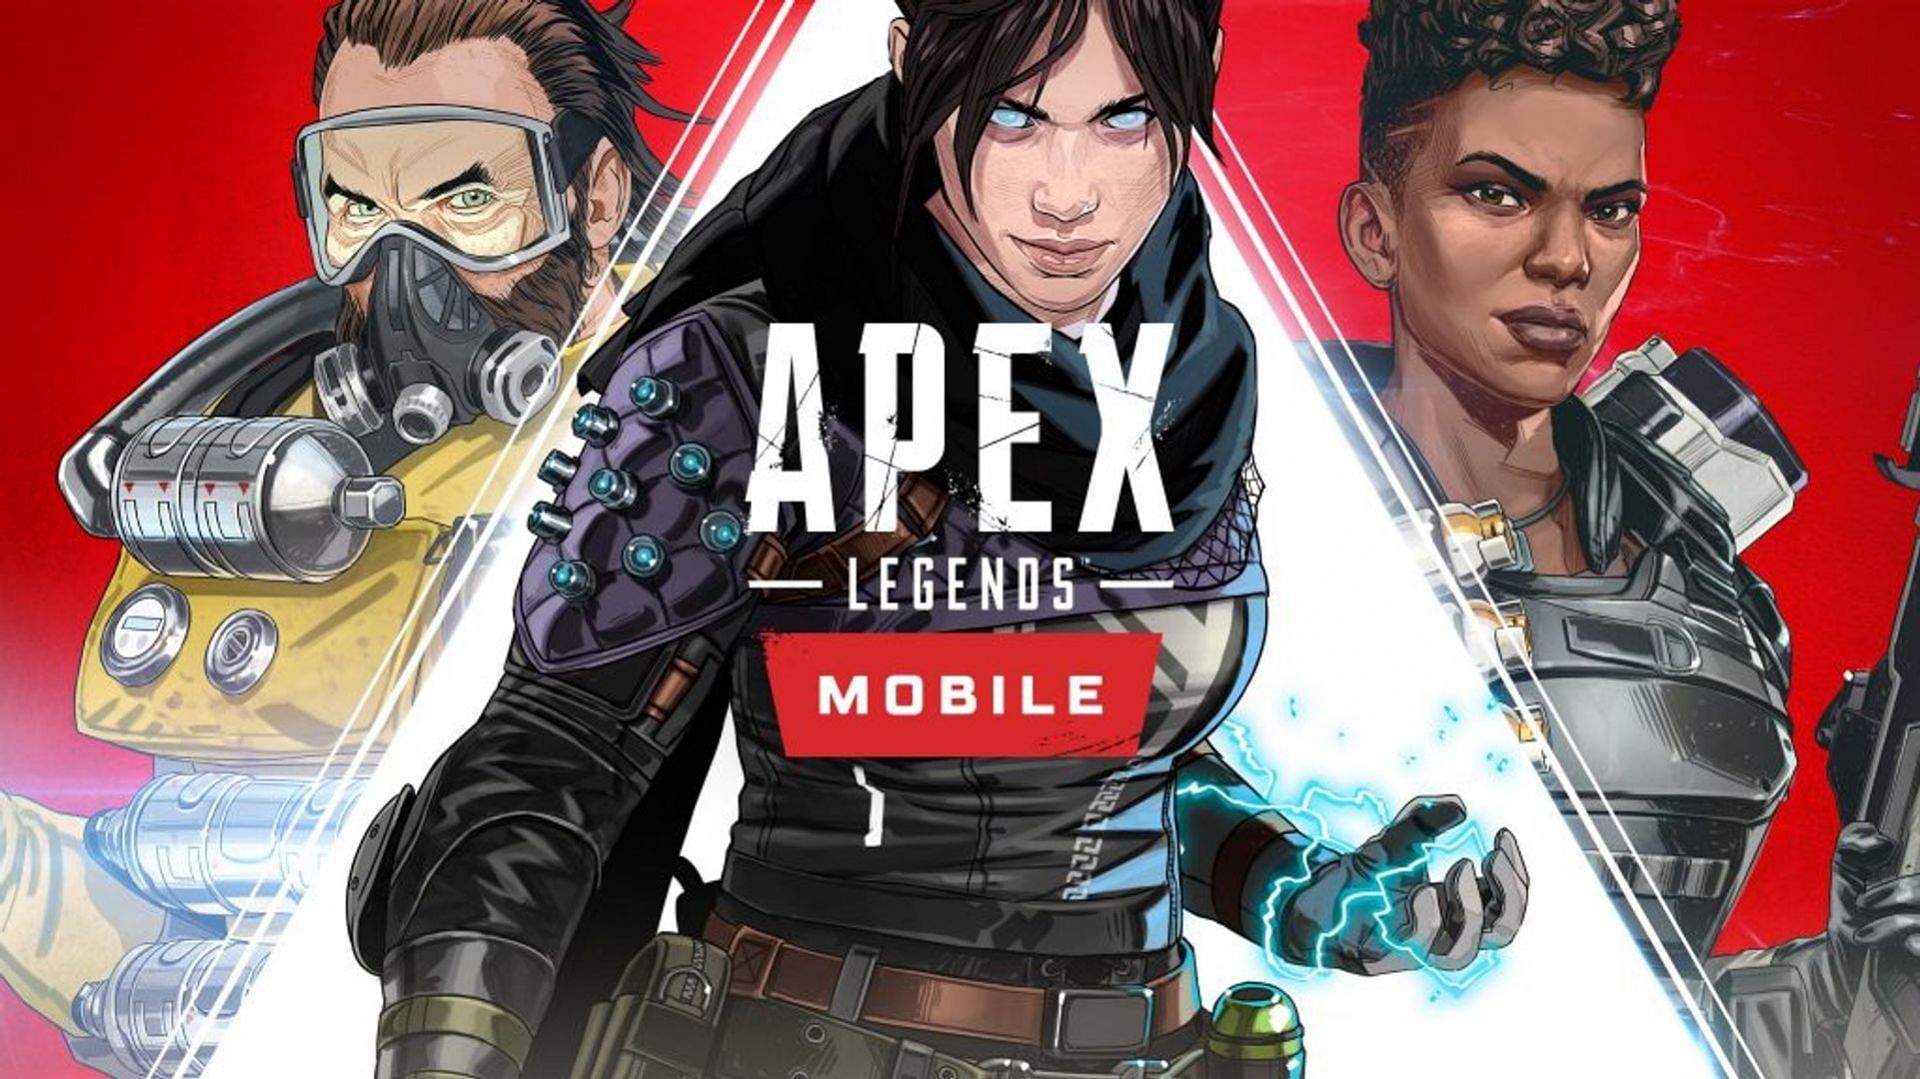 iOS users need to use the Apple App Store (Image via Apex Legends Mobile)